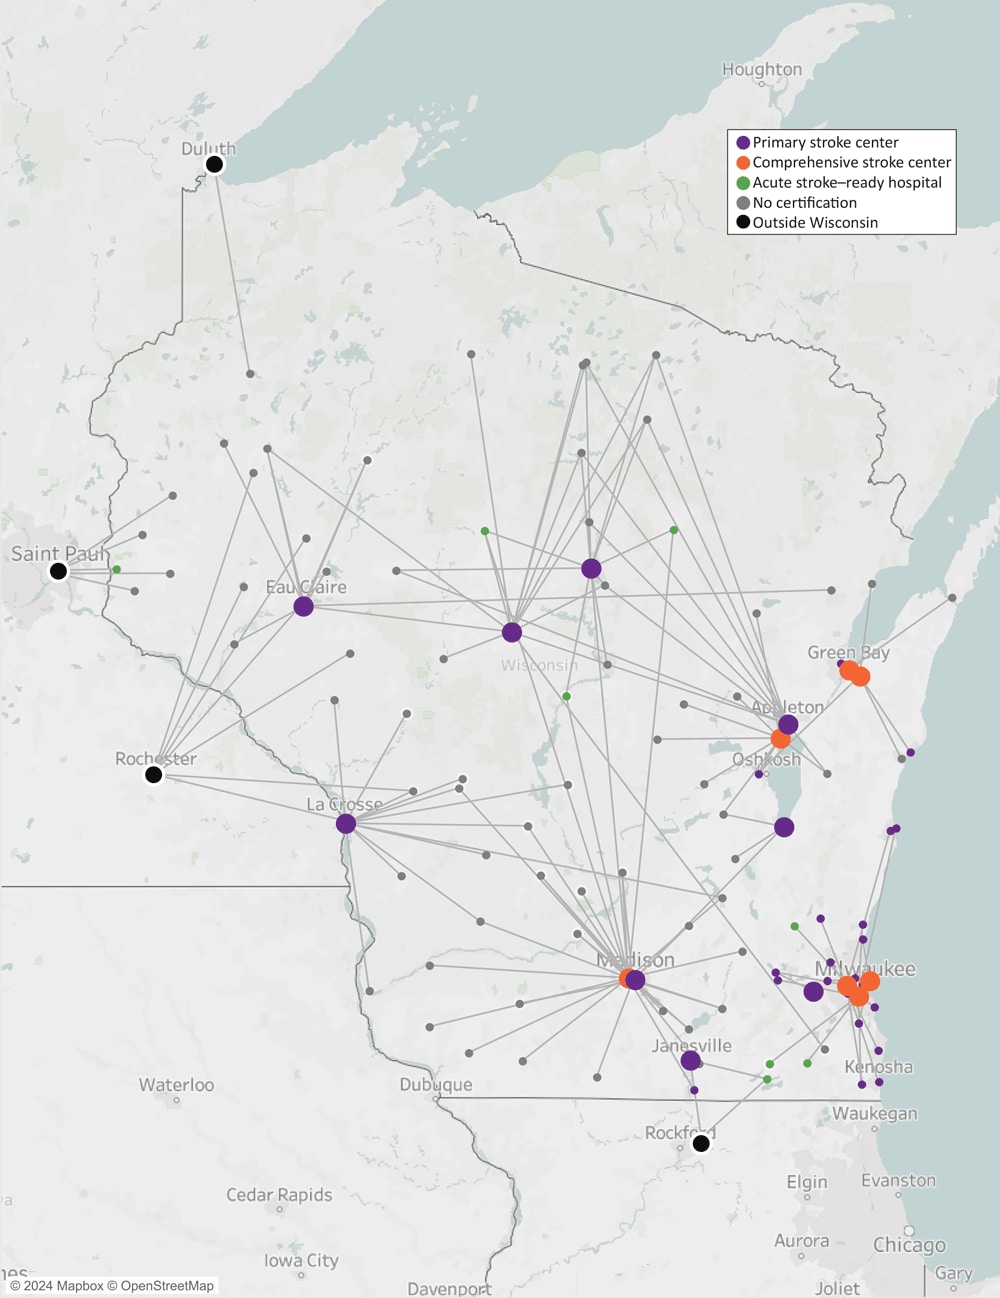 This map shows Wisconsin and the locations of large tertiary hospitals: in Appleton (1 primary stroke center), Eau Claire (1 primary stroke center), Fond du Lac (1 primary stroke center), Green Bay (2 comprehensive stroke centers), Janesville (1 primary stroke center), La Crosse (1 primary stroke center), Madison (2 primary stroke centers, 1 comprehensive stroke center), Marshfield (1 primary stroke center), Milwaukee (3 comprehensive stroke centers), Neenah (1 comprehensive stroke center), Waukesha (1 primary stroke center), and Wausau (1 primary stroke center). The map also shows locations of small rural hospitals throughout the state (n = 109); of these, 31 are primary stroke centers, 8 are acute stroke–ready hospitals, and 70 have no stroke accreditation. The map also shows lines indicating which small rural hospitals transfer patients to which large tertiary hospitals. Large tertiary hospitals in 4 cities outside Wisconsin (Duluth, Rochester, and St. Paul, Minnesota, and Rockford, Illinois) also accept transfers of patients from small rural hospitals in Wisconsin.